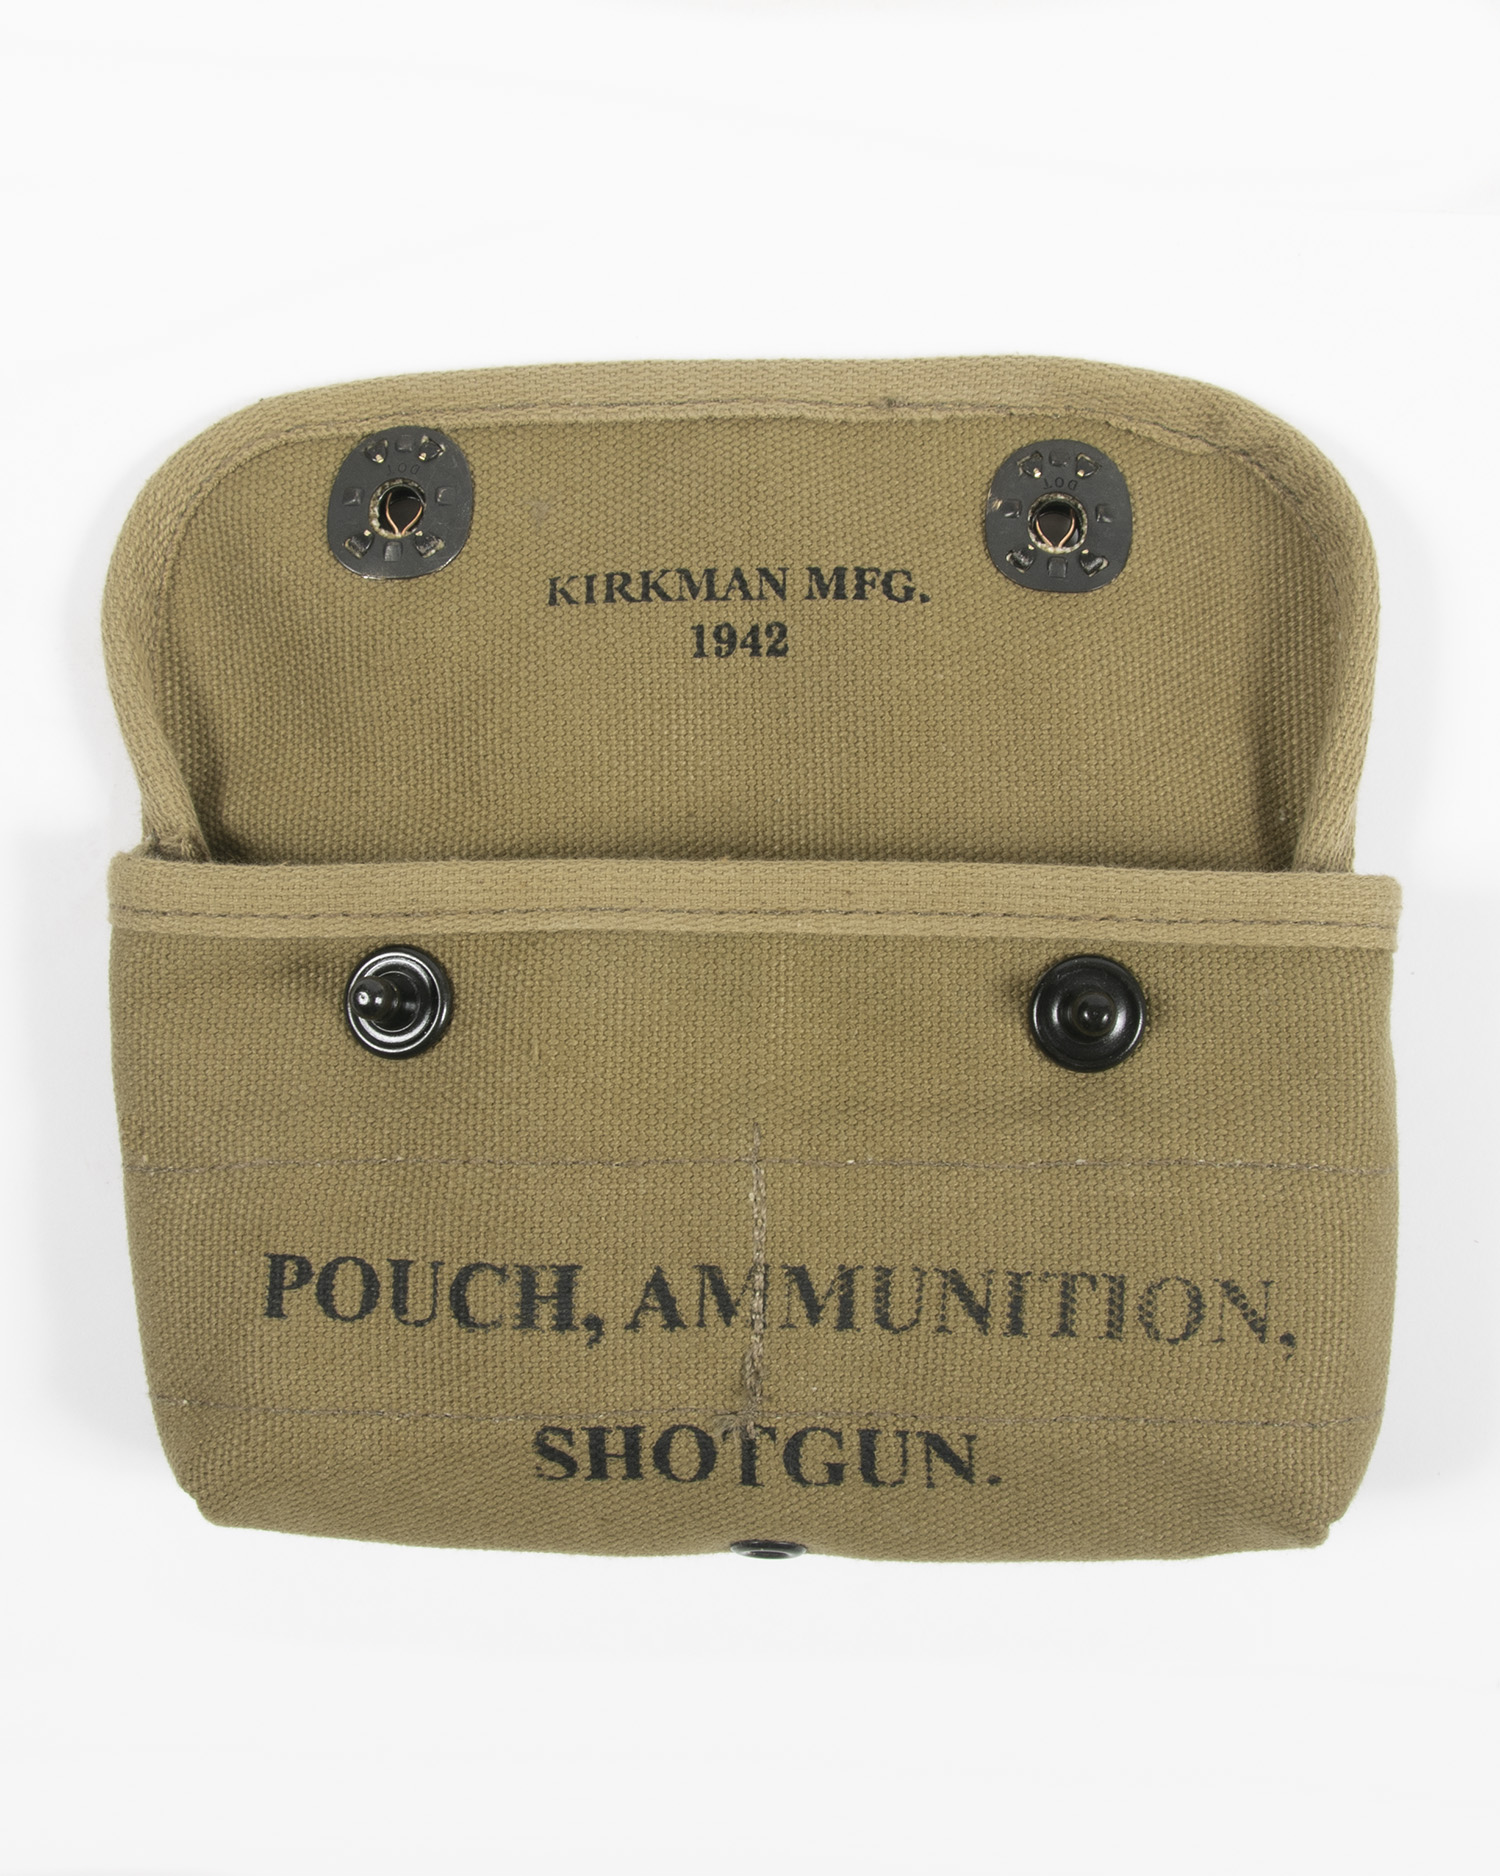 US WWII Shotgun Pouch, Made in USA